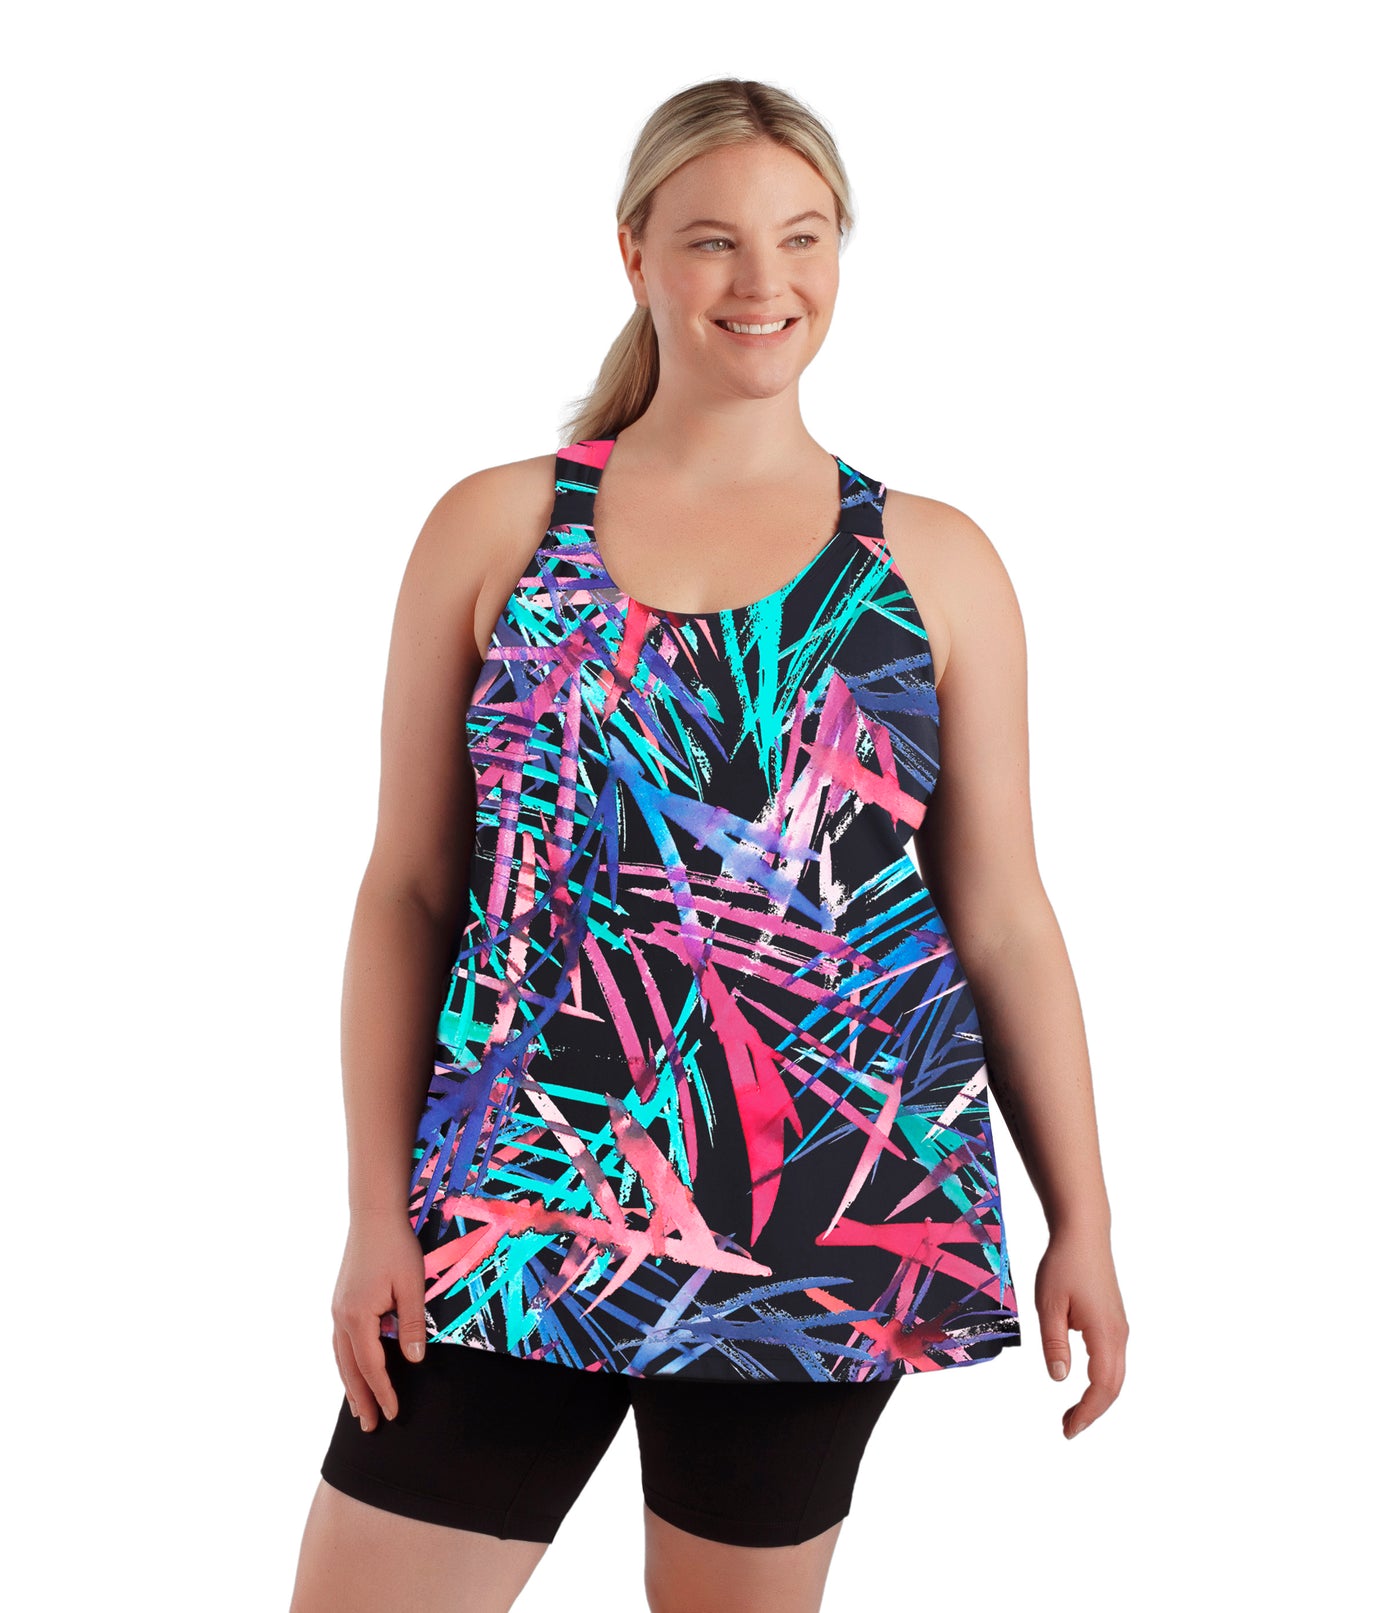 Plus size woman, facing front, wearing JunoActive plus size AquaSport Hanalei Tankini Top Sunset Palm Print. Shoulder cinch detail in front and vents at the side seams. Pink, blue and teal abstract line print.   